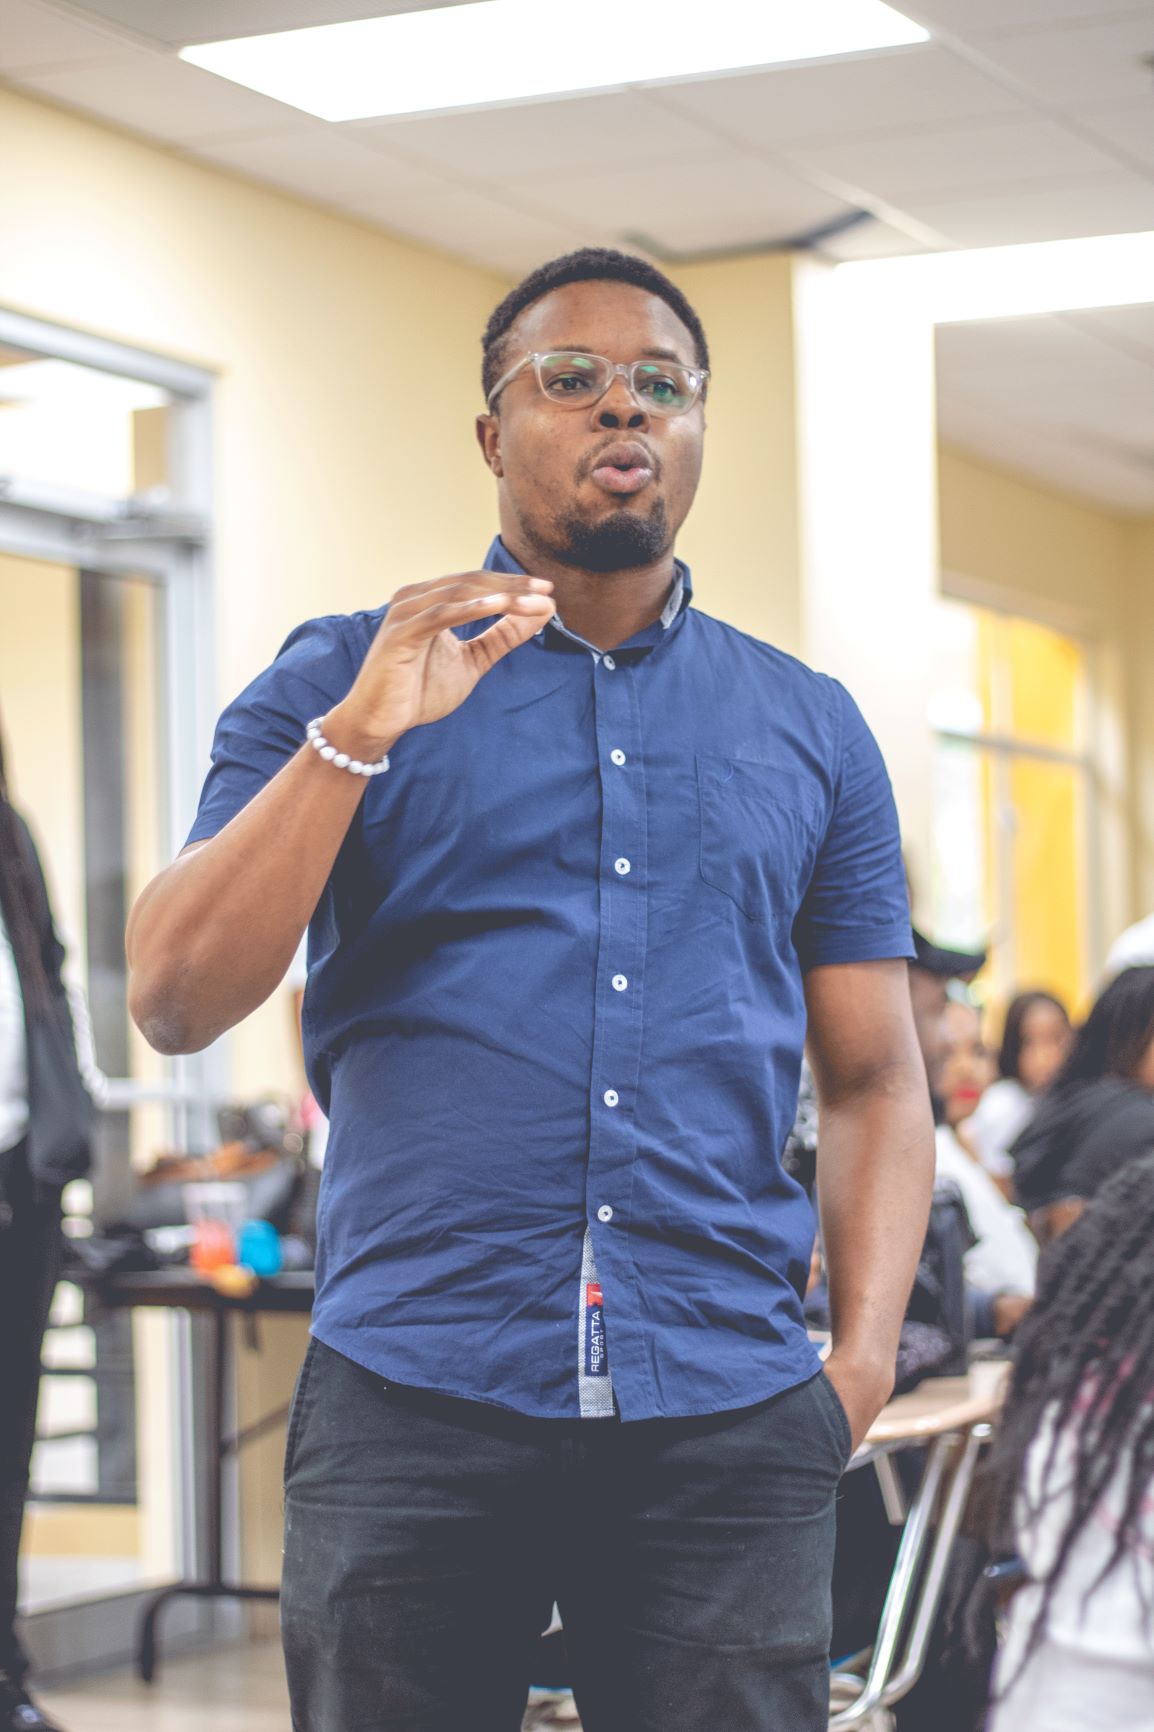 Founder and CEO of the University and College Ambassadors of Jamaica, Kristofferson Nunes, encourages members of the Future Marters Association to focus on building their dreams during his presentation at a seminar held on the Papine campus of the University of Technology, Jamaica on Janaury 17, 2019. Photo by Tatyana Atkinson/UJS News